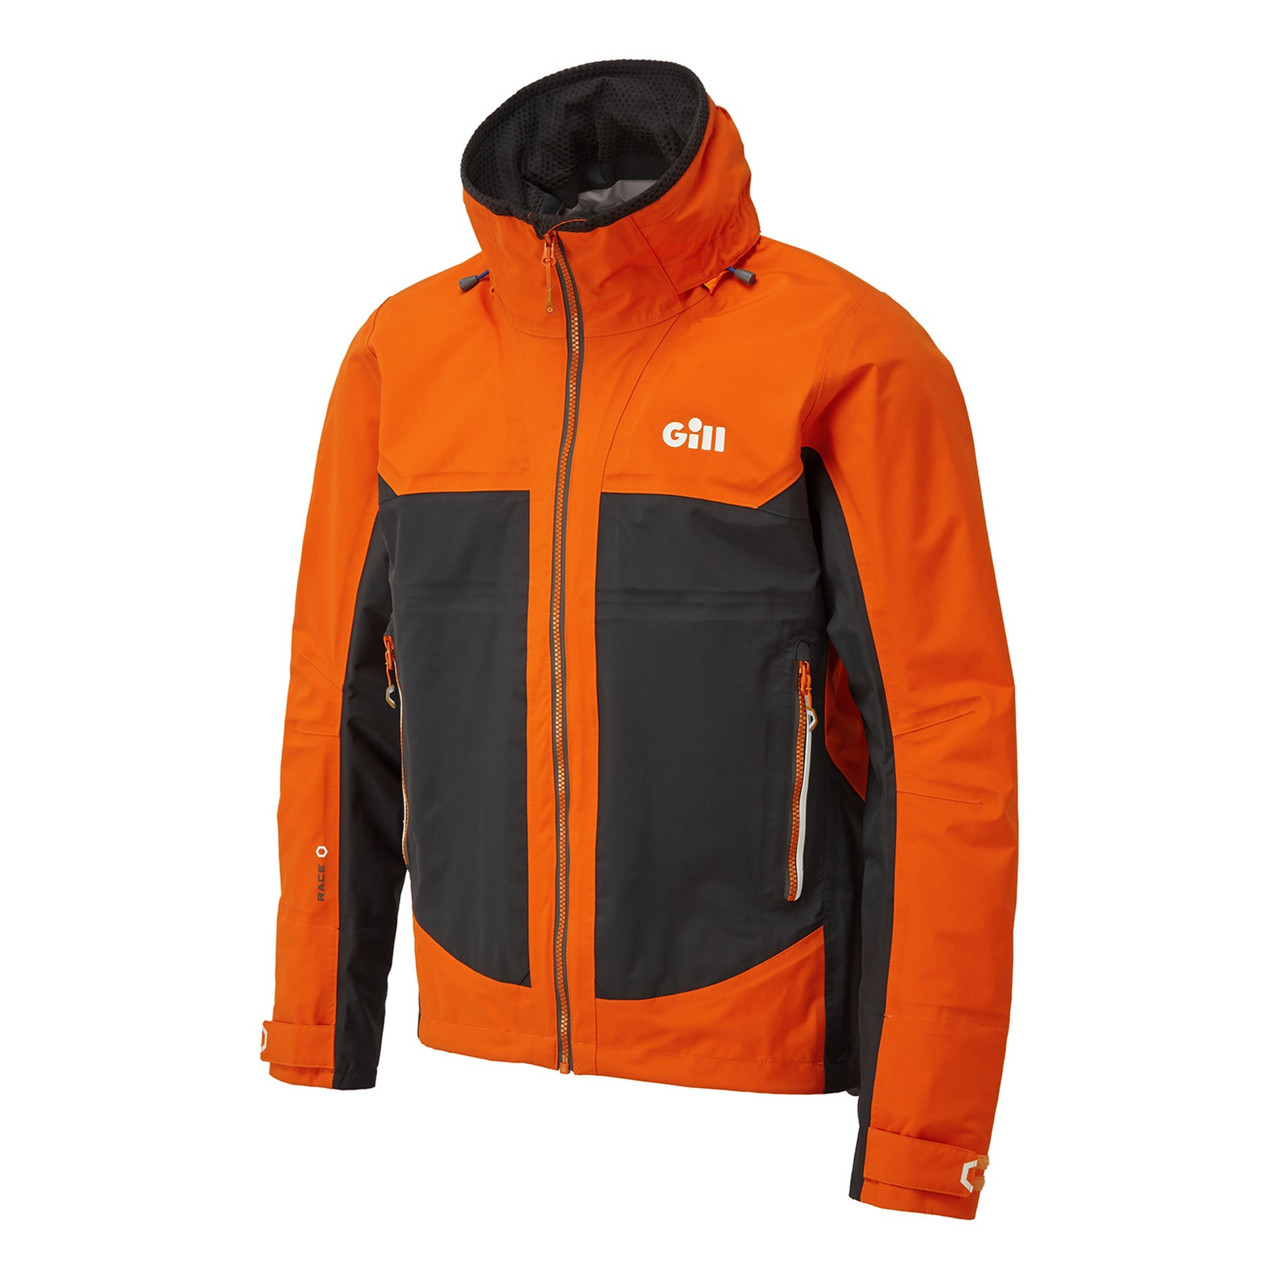 Race Fusion Jacket - Gill Marine Official US Store